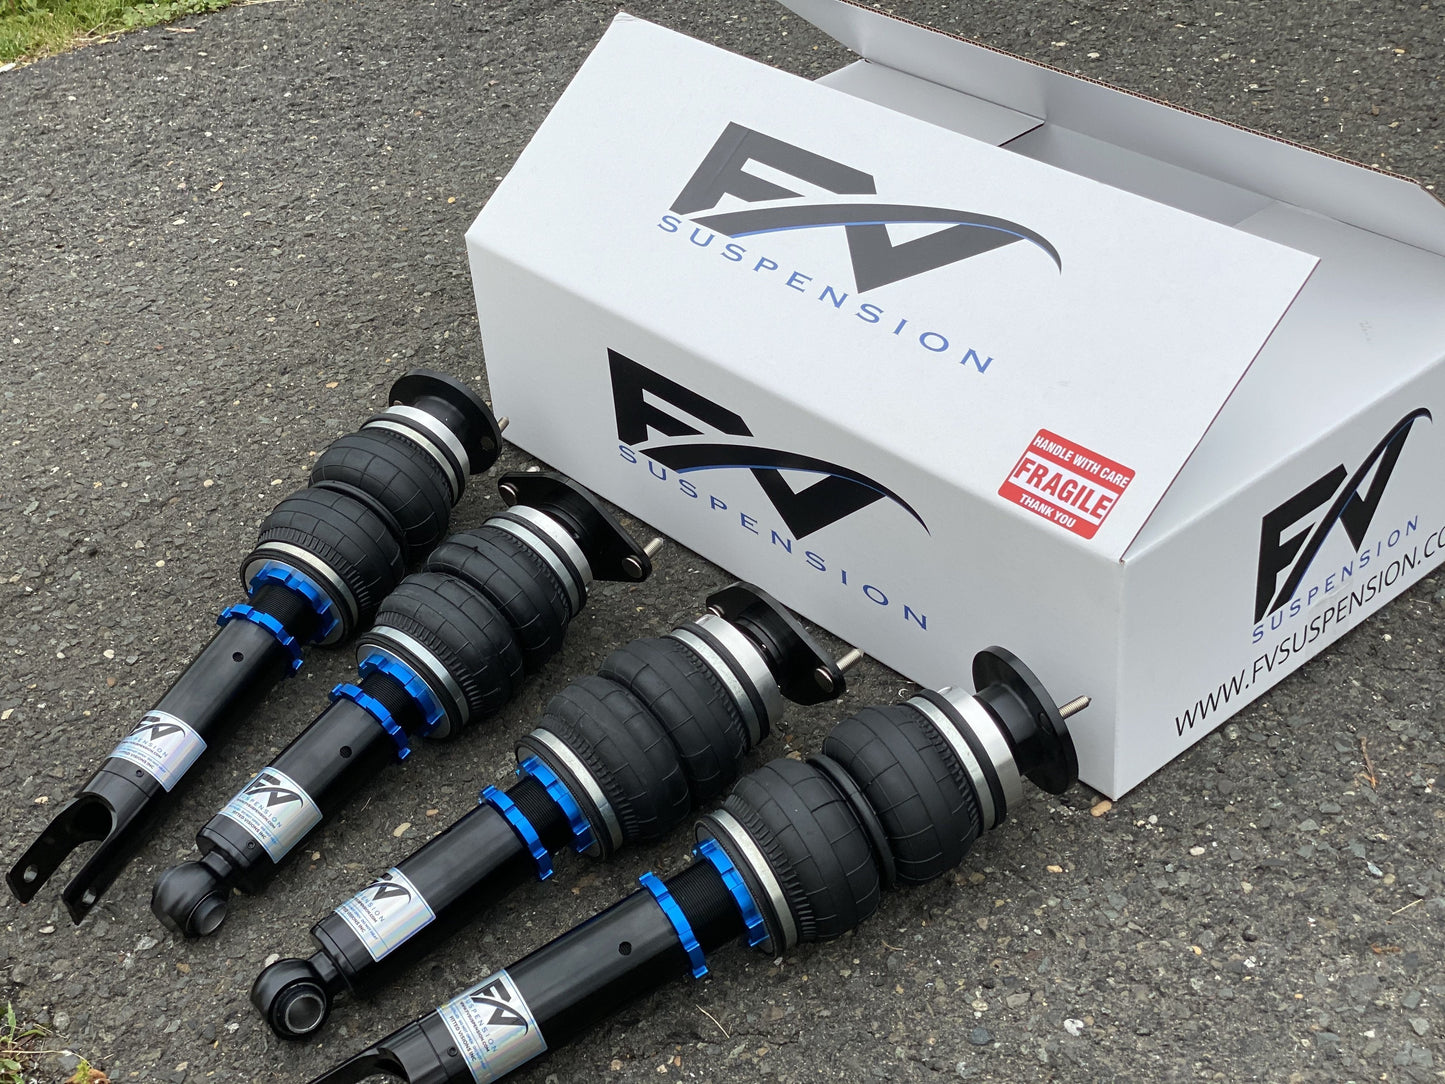 FV Suspension Tier 1 Budget kit Complete Air Ride kit for 94-02 Audi A8  2WD - FVALFullkit62